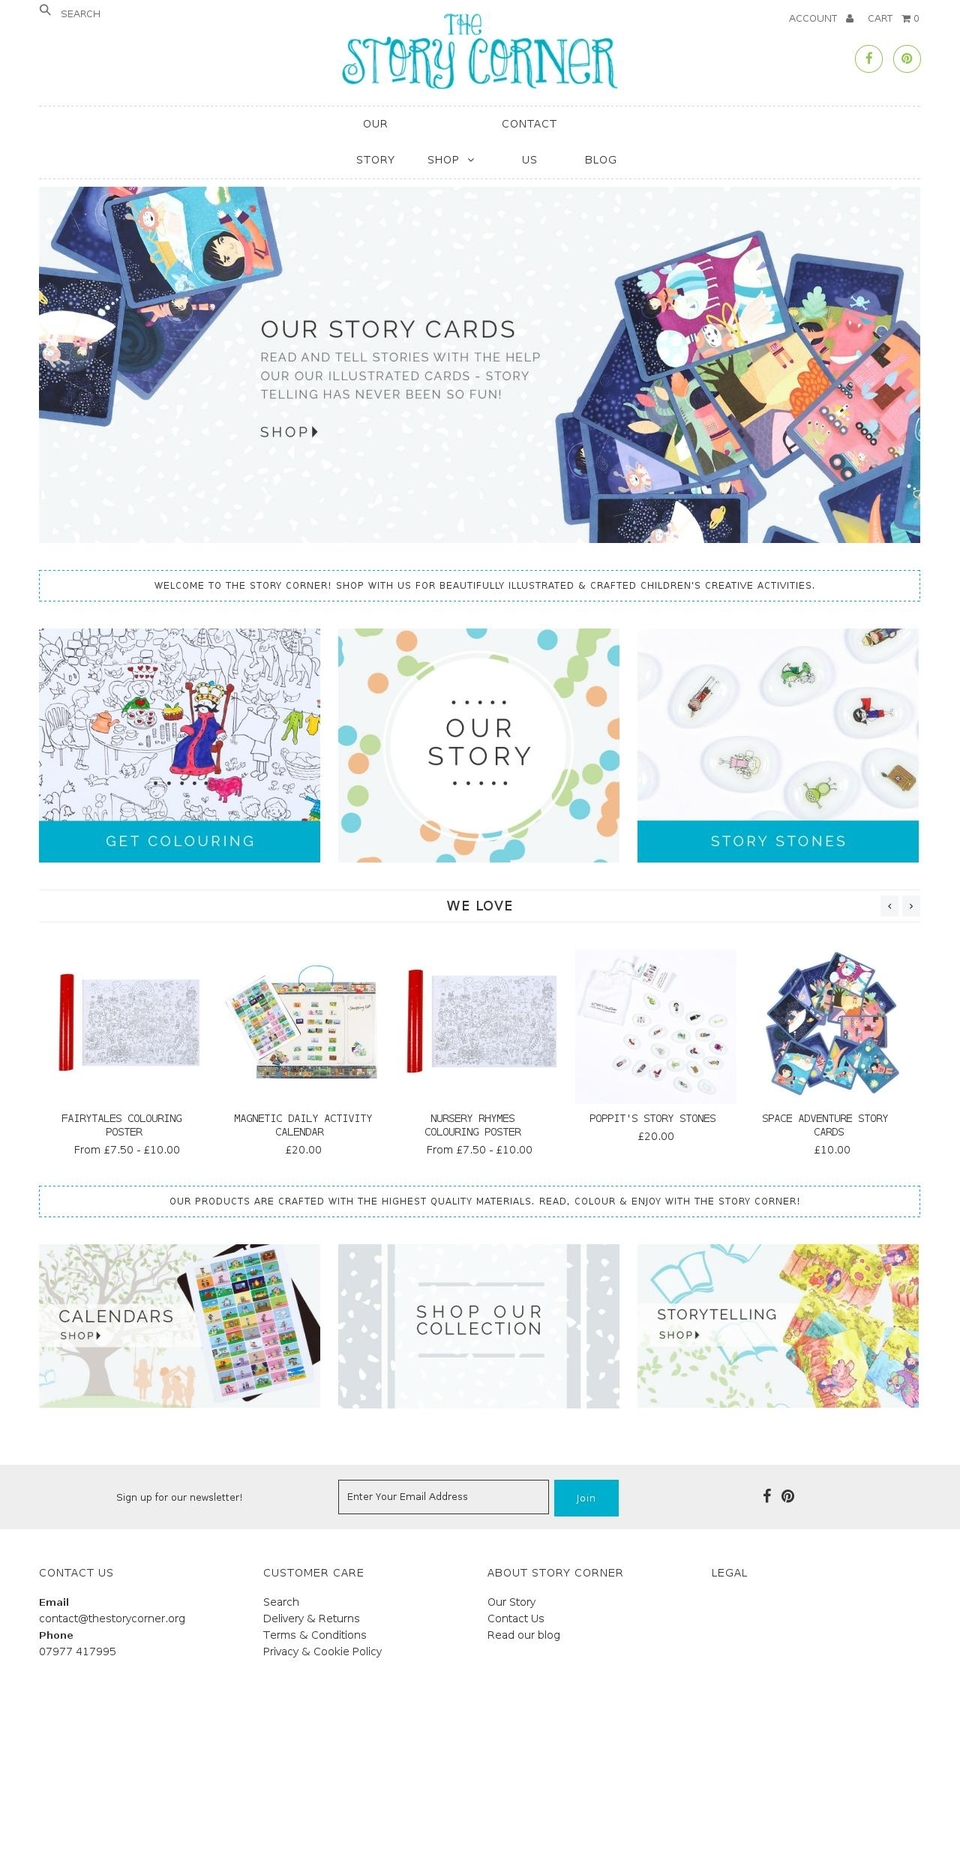 Story Shopify theme site example thestorycorner.org